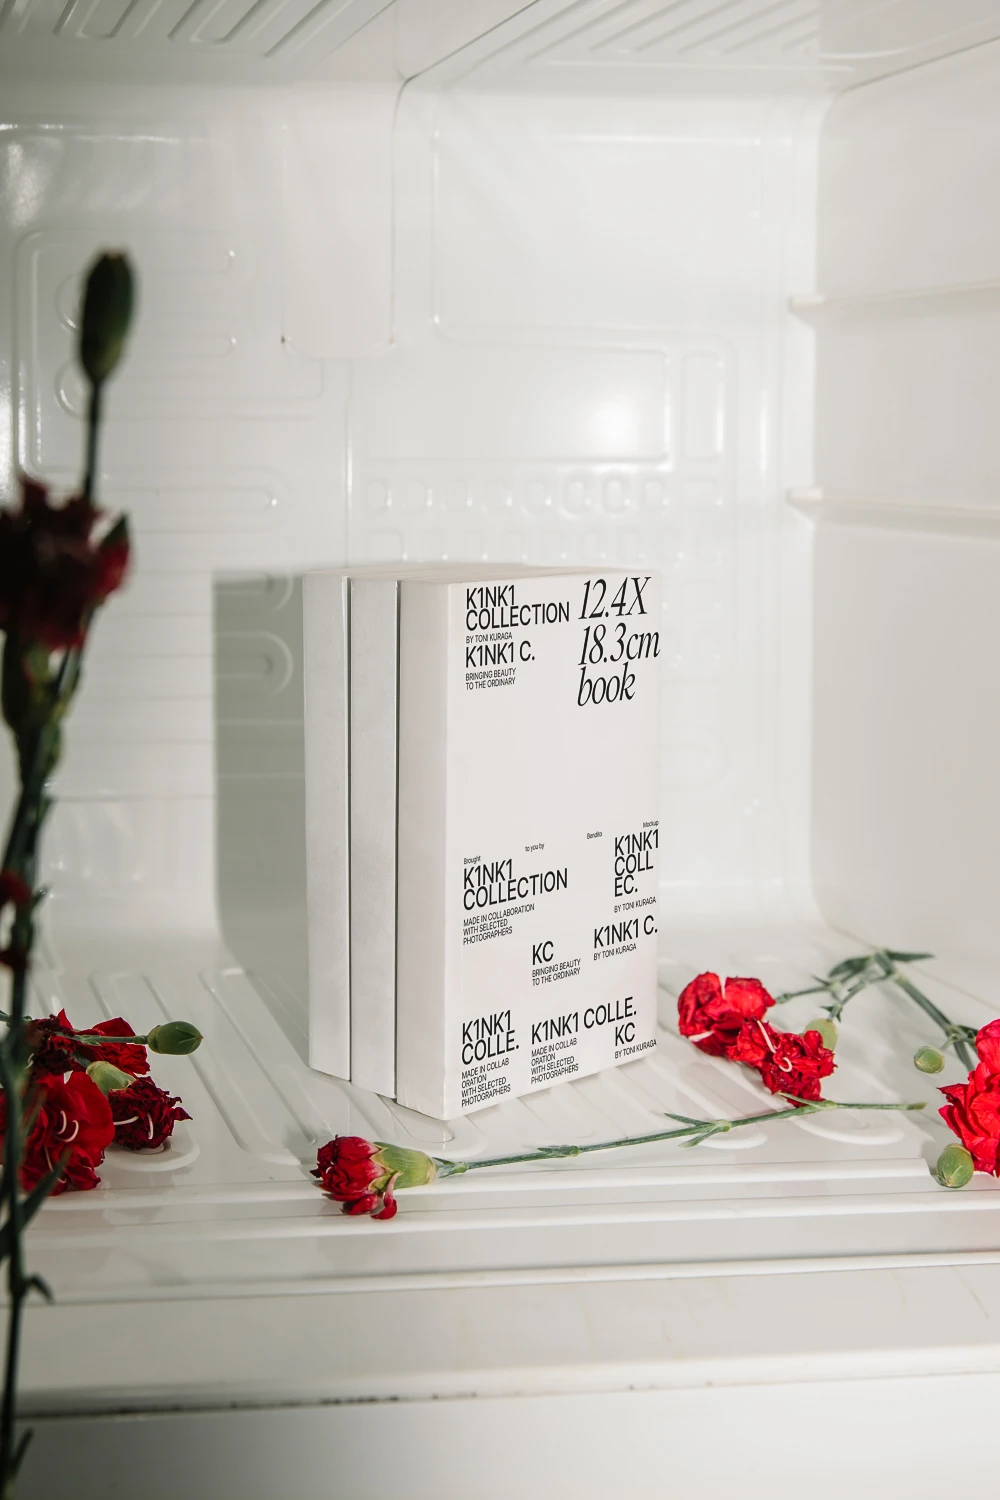 Several paperback book mockups in the inside of a refrigerator decorated with red flowers.